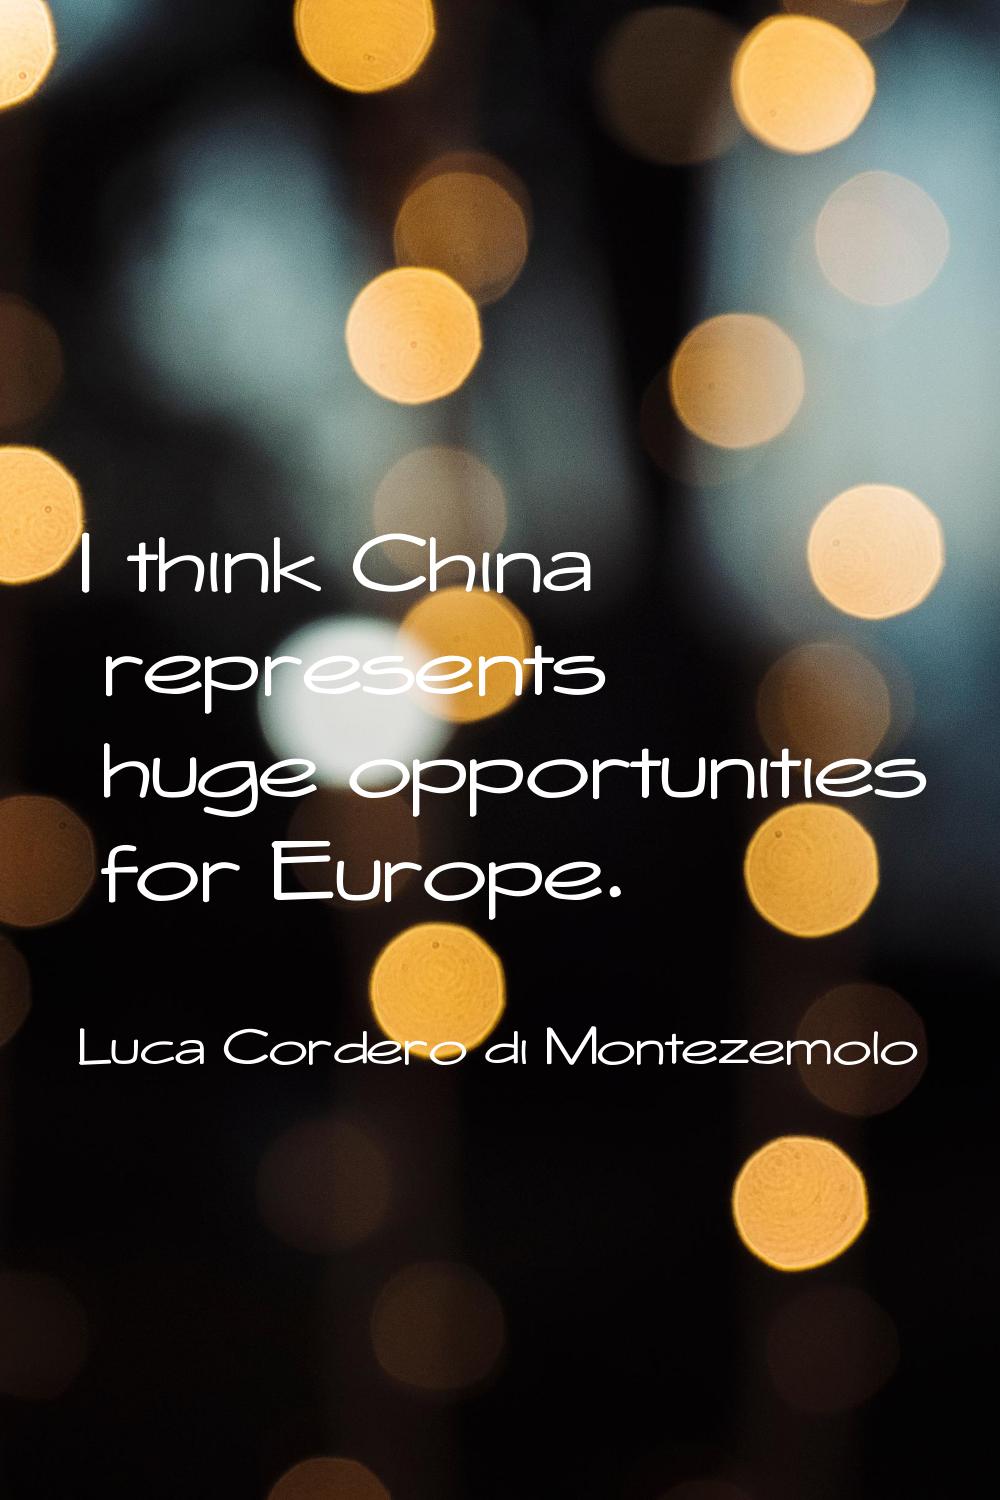 I think China represents huge opportunities for Europe.